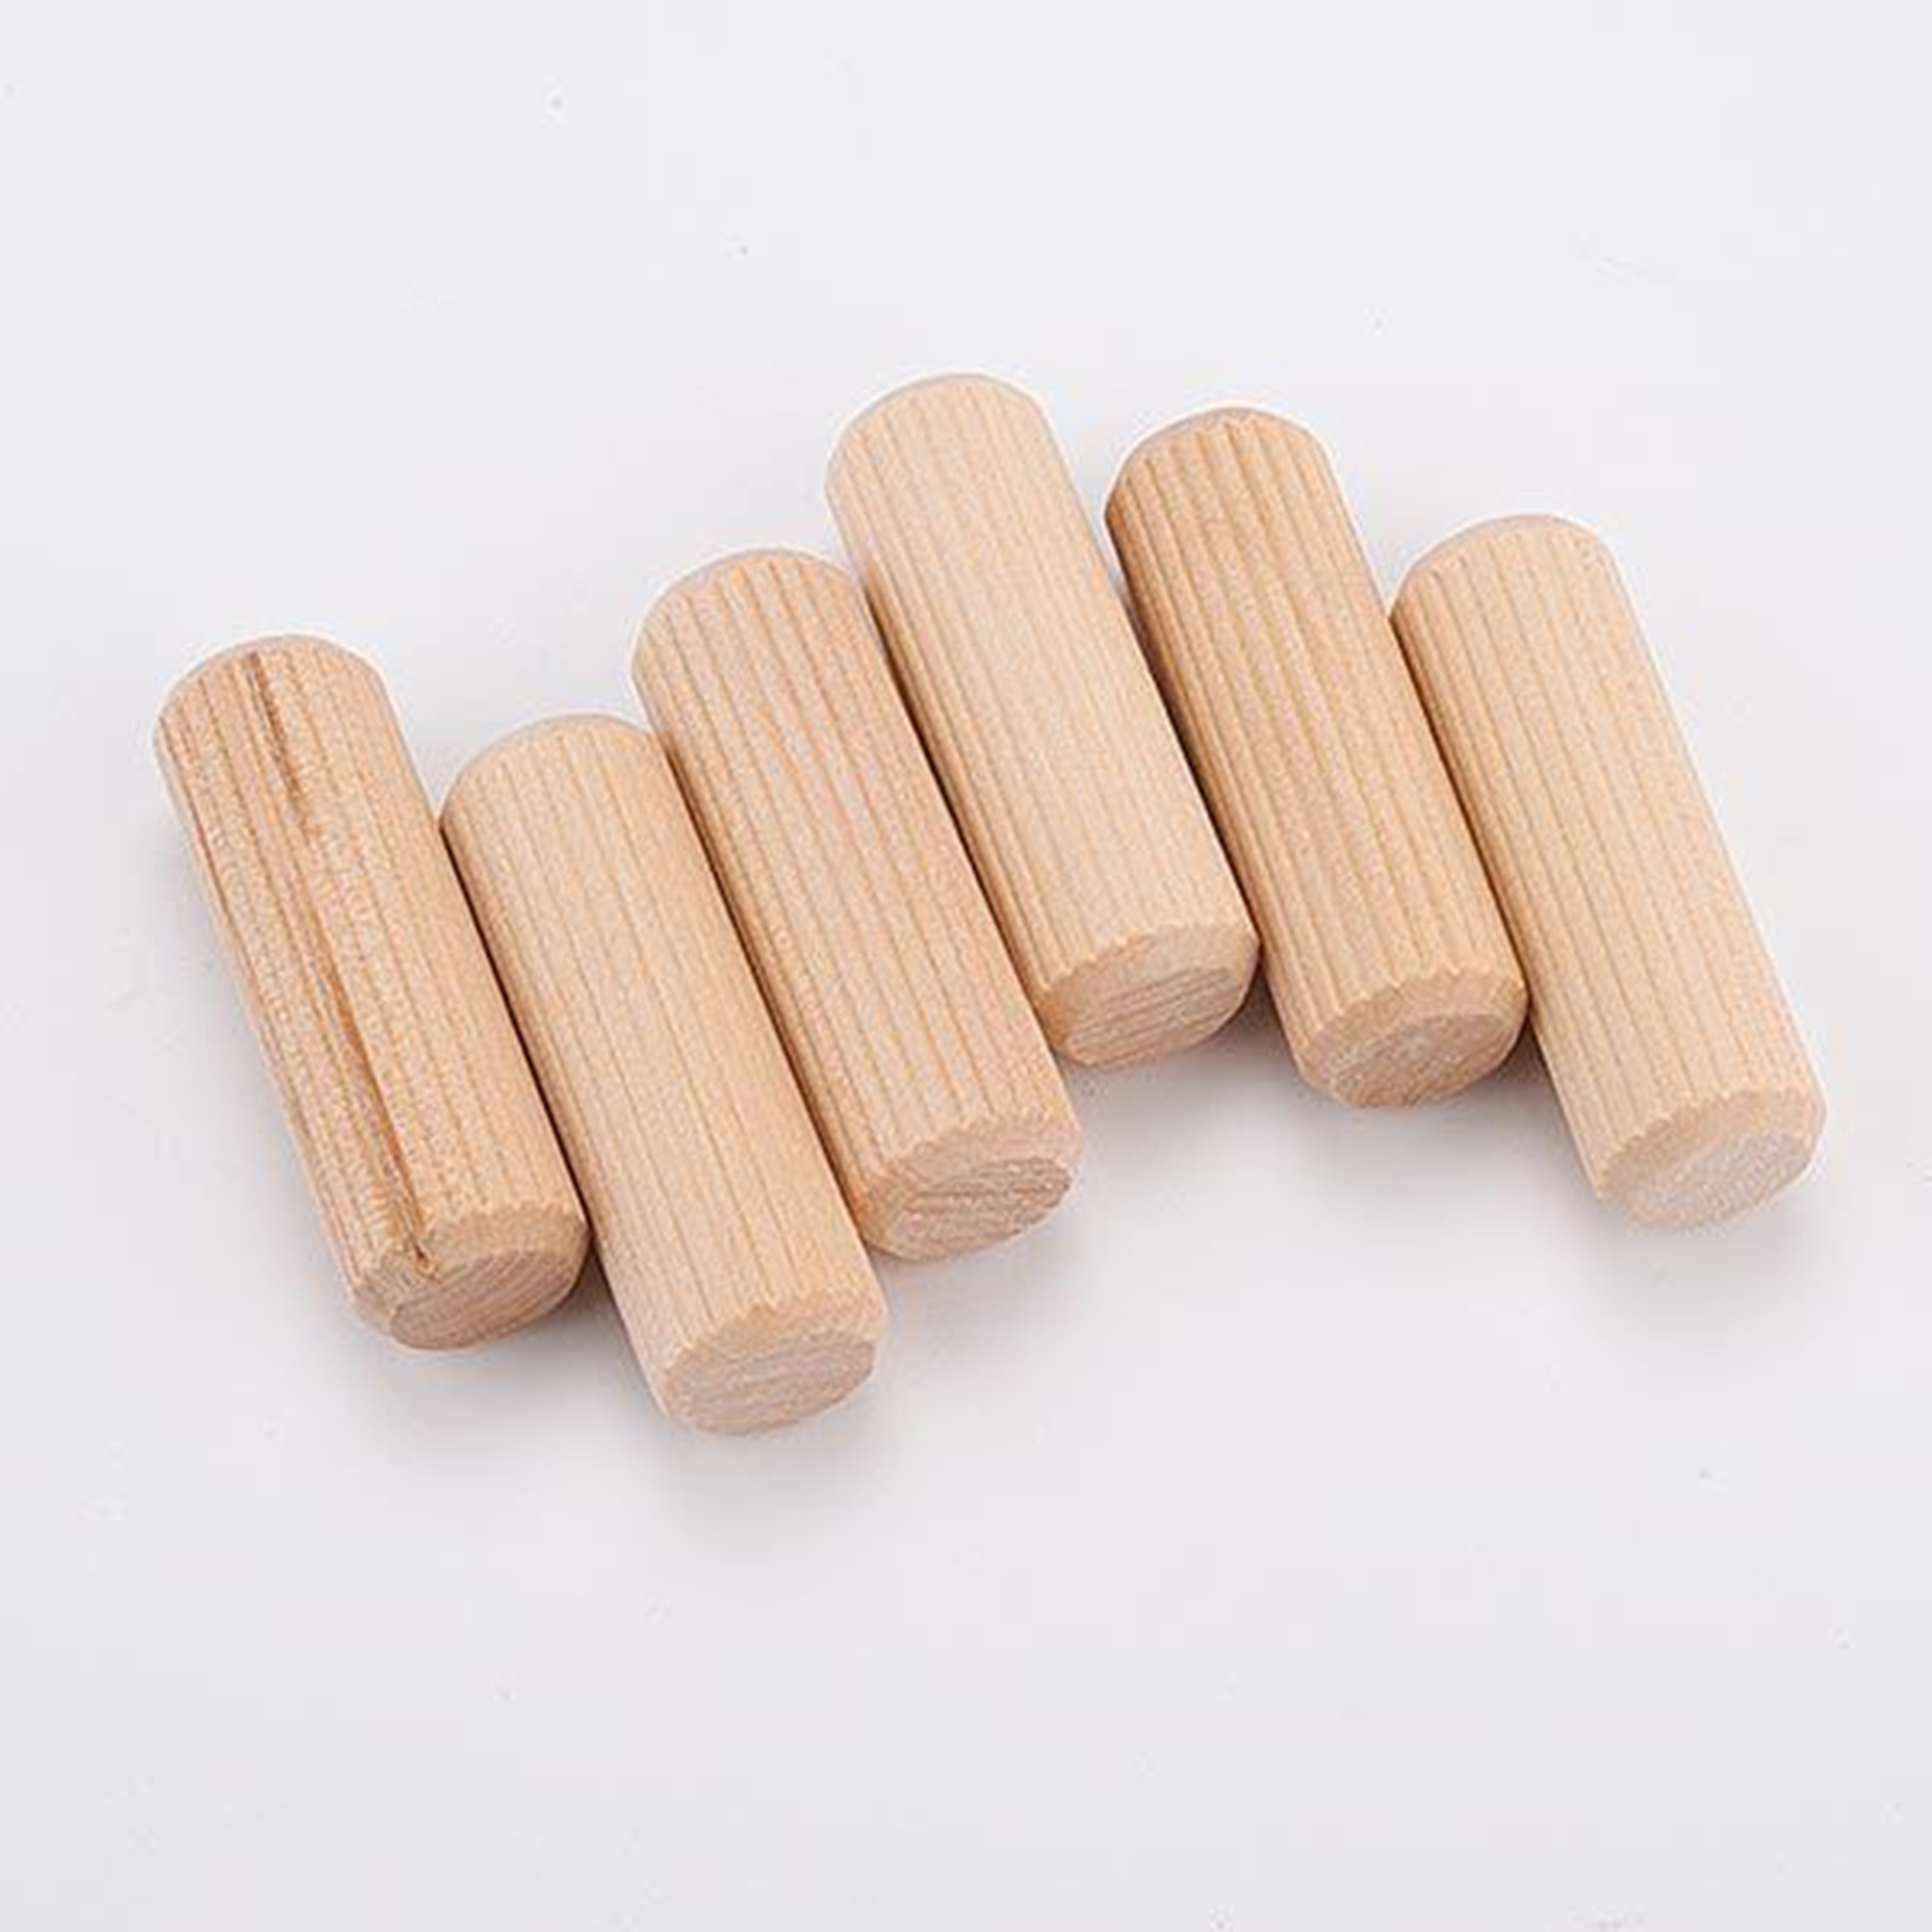 20-count 1/2-inch Fluted Dowel Pins